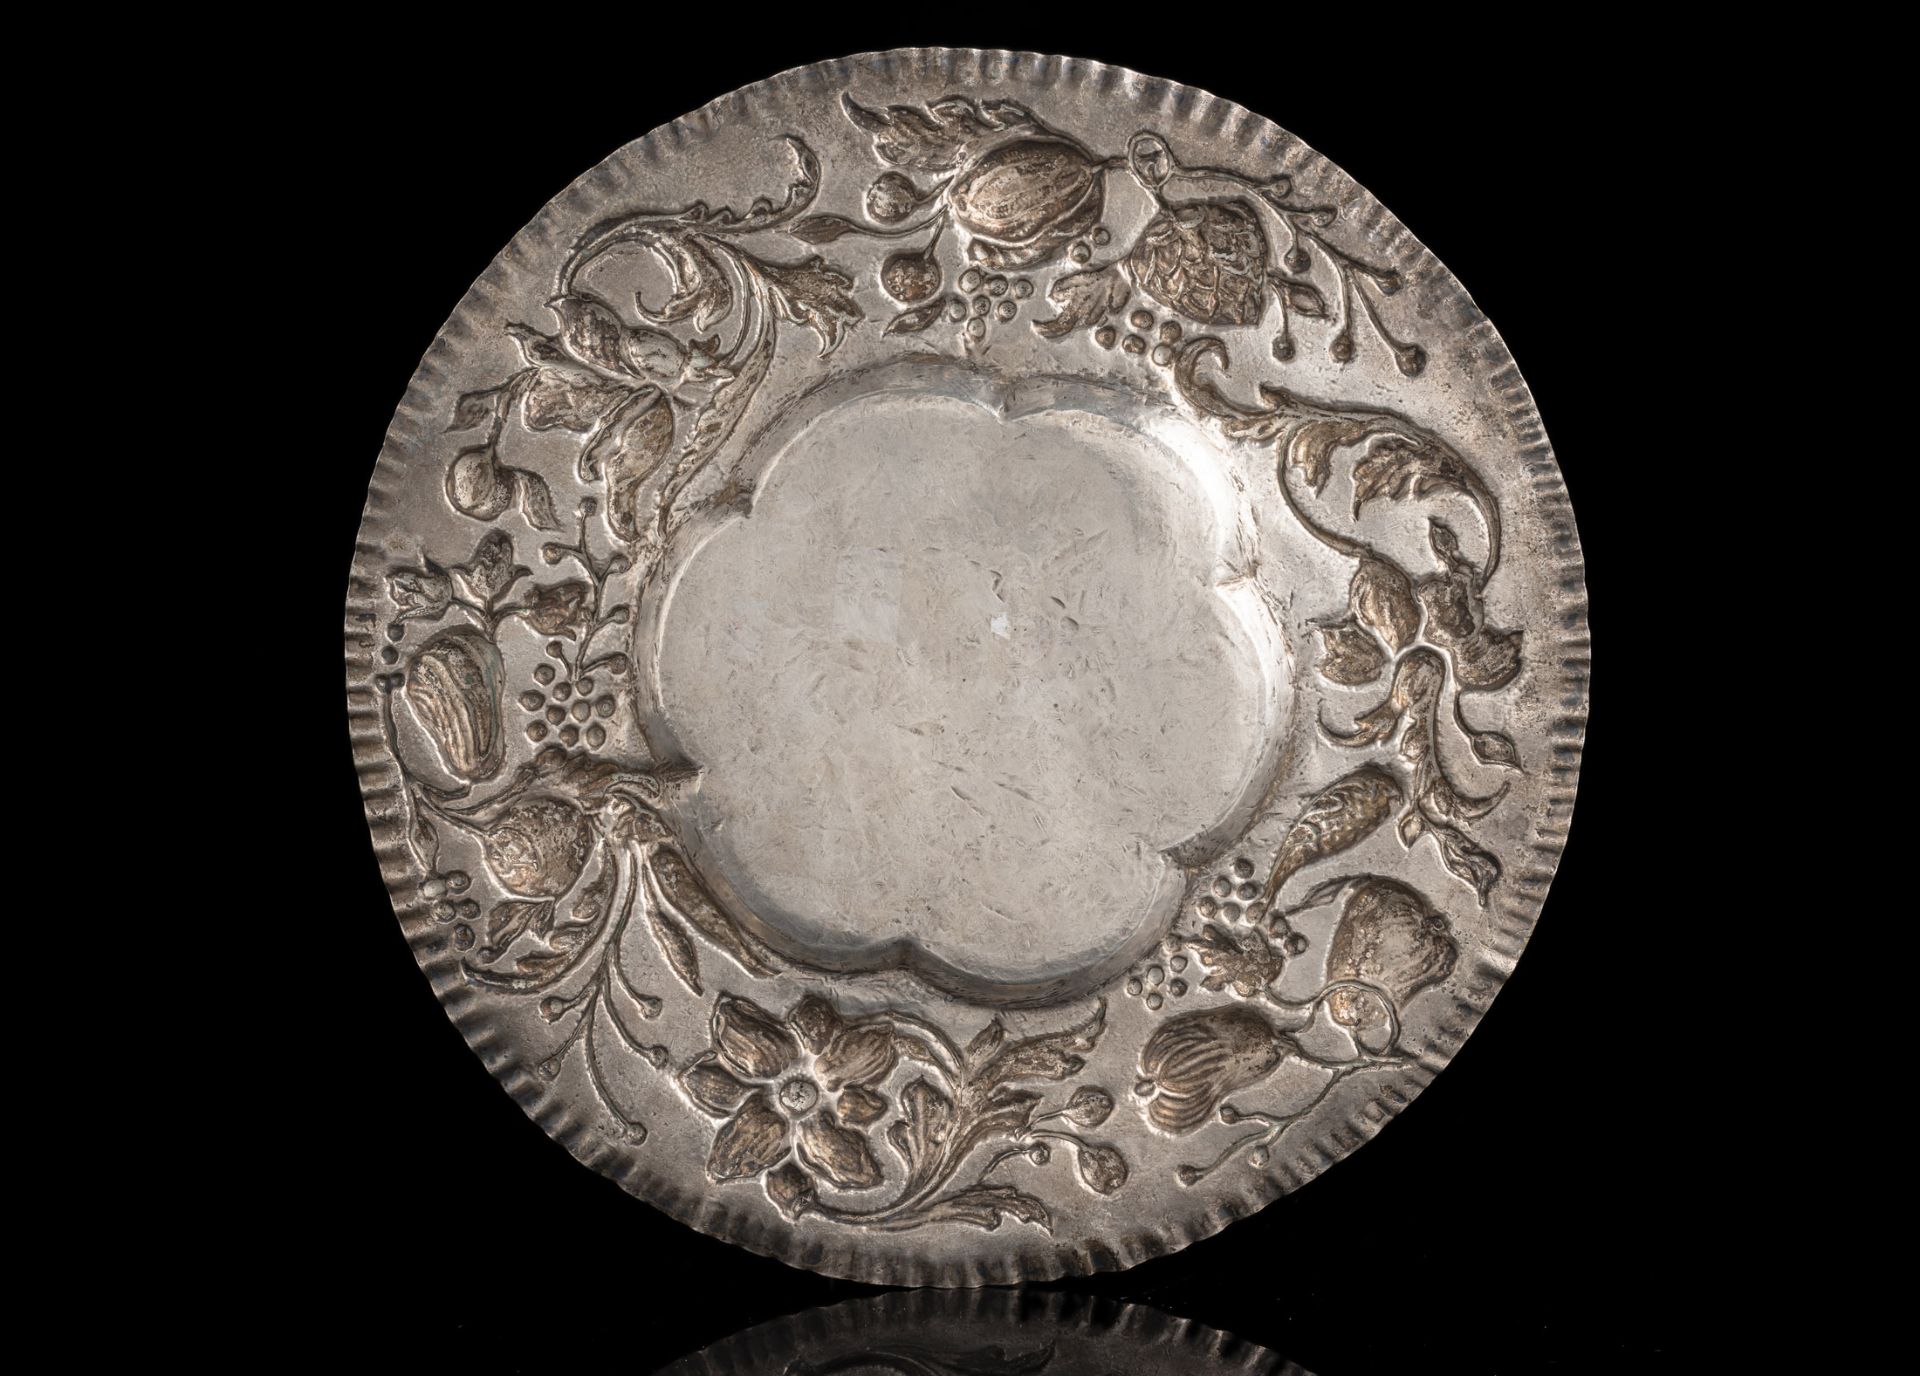 A SILVER ROUND DISH WITH FRUIT DECOR - Image 2 of 2